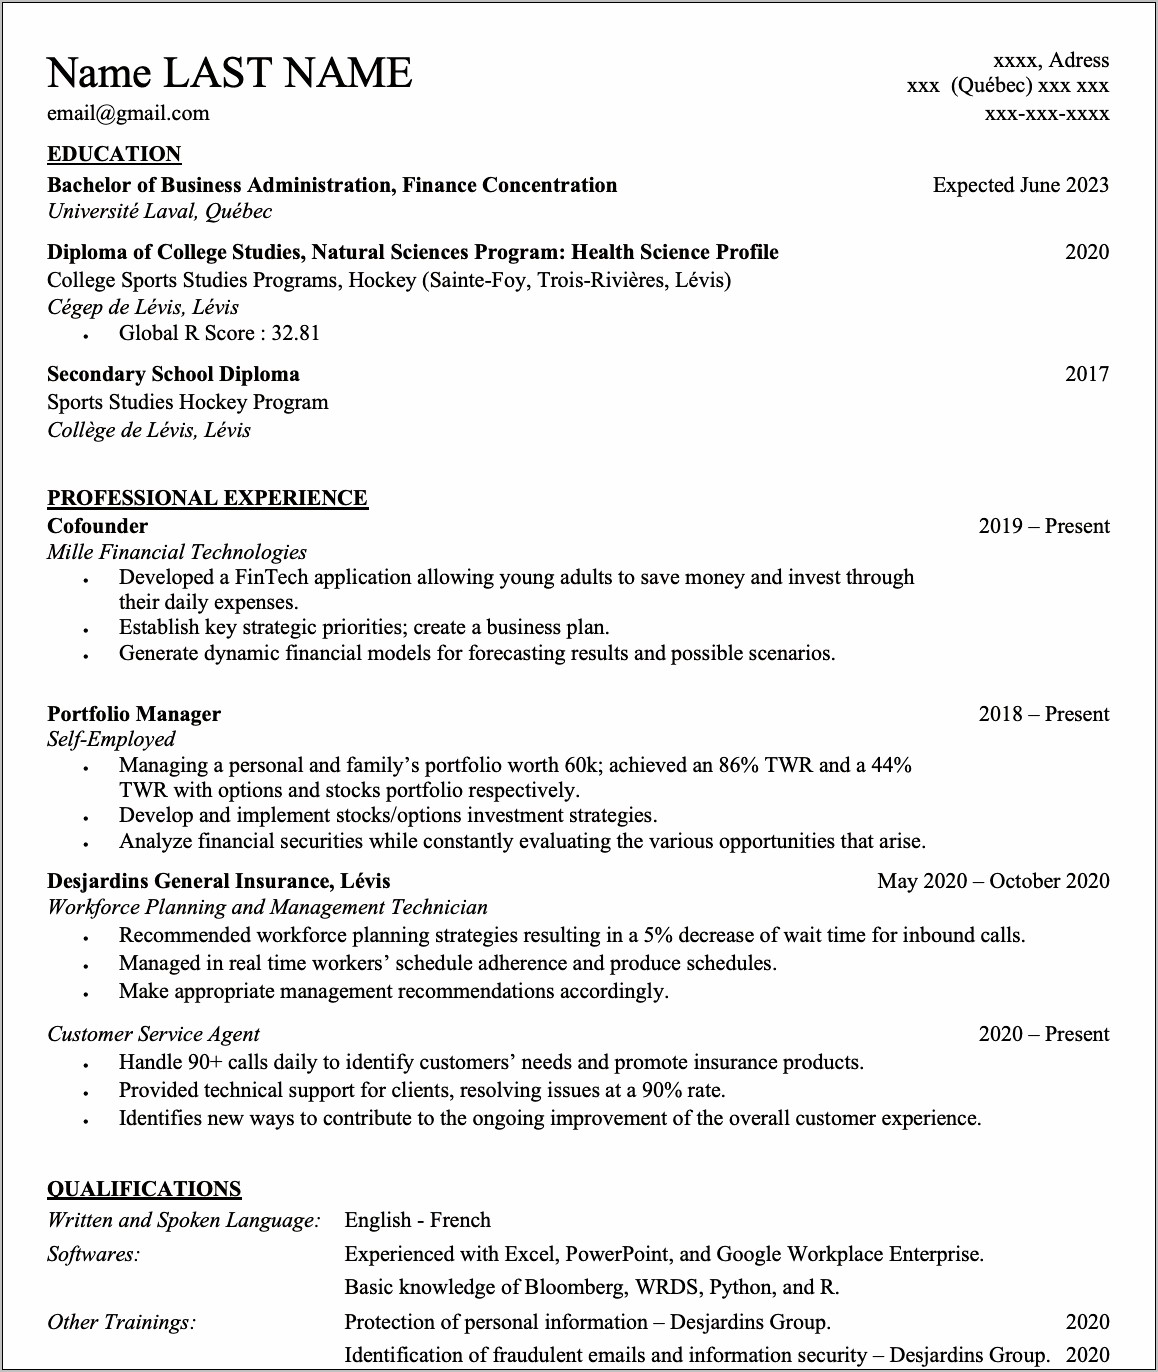 Resume Deal Experience Wacc Analysis Wall Street Oasis